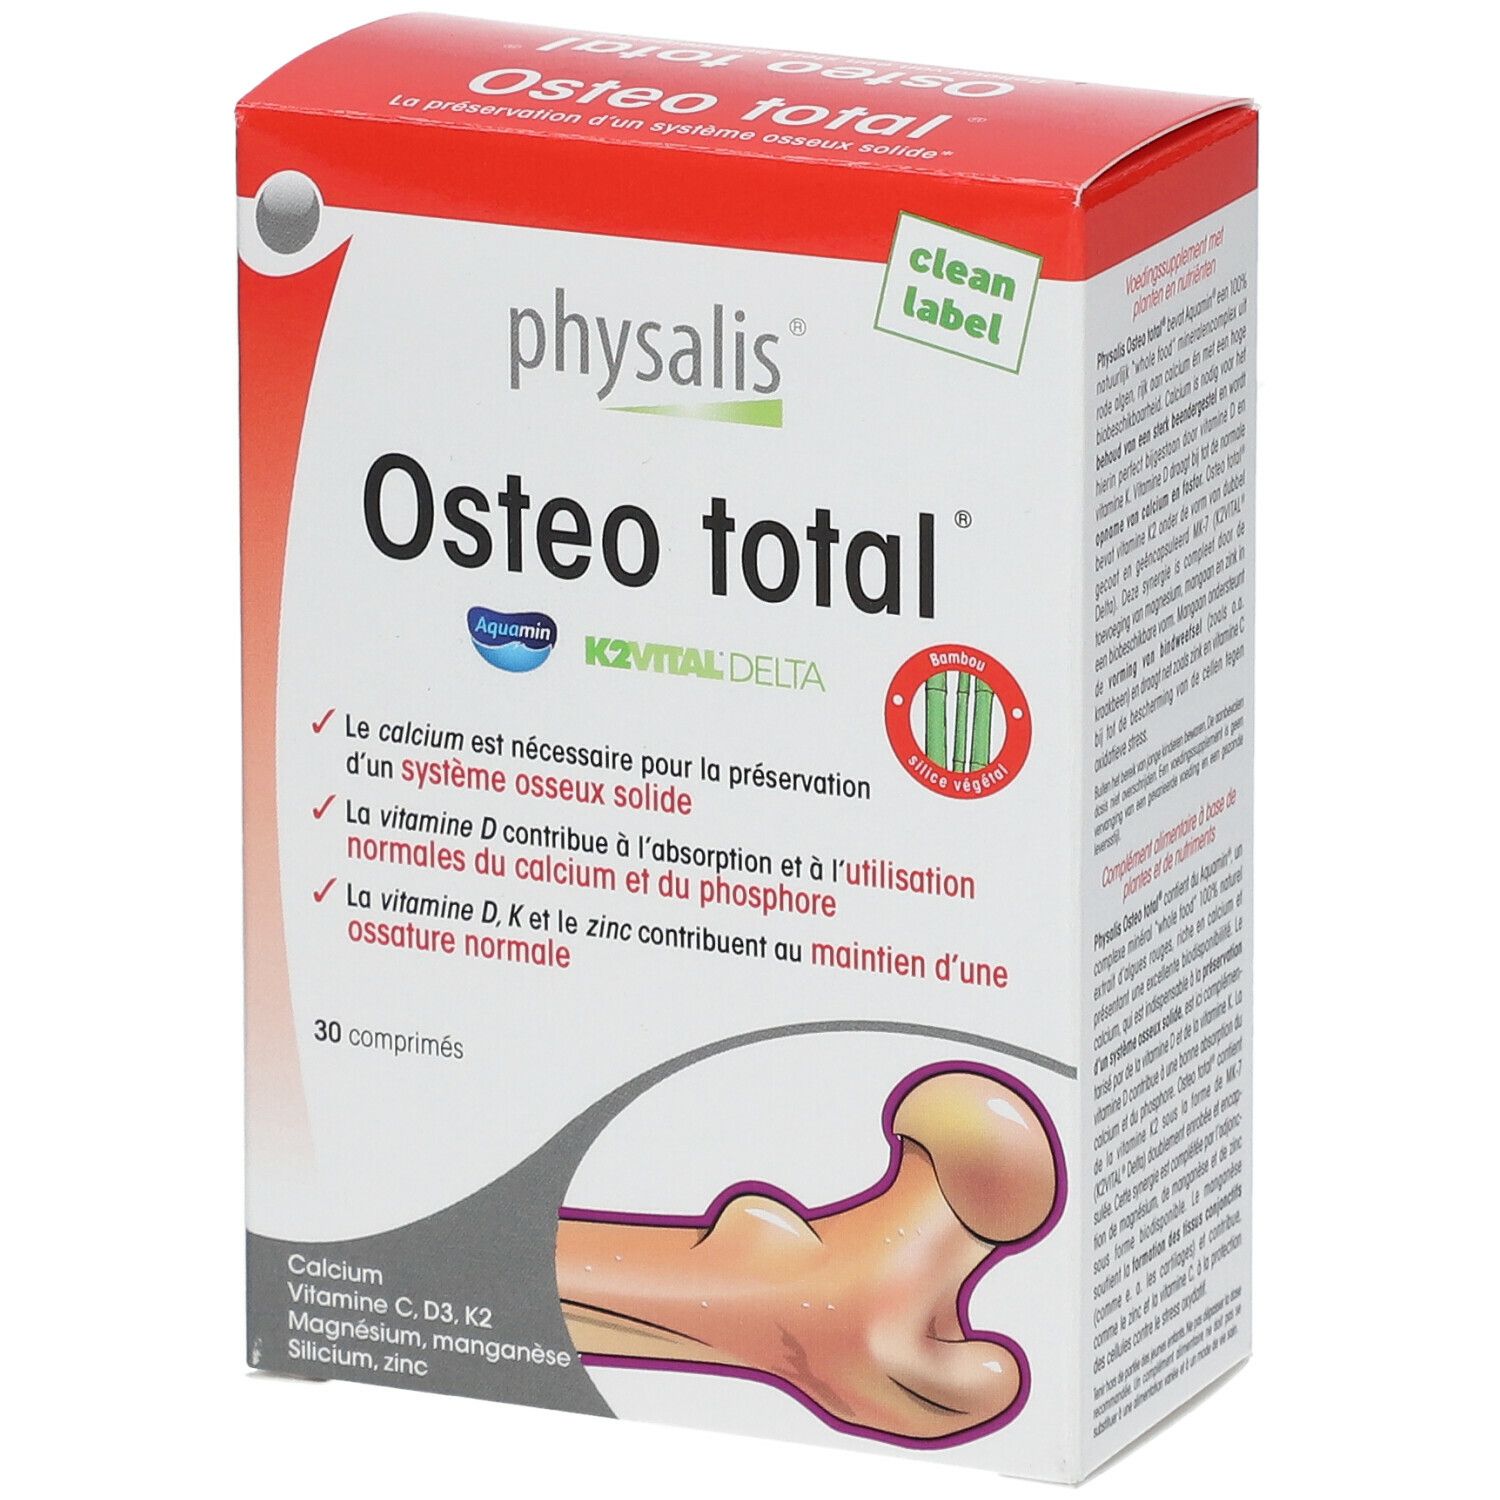 Physalis Osteo total®